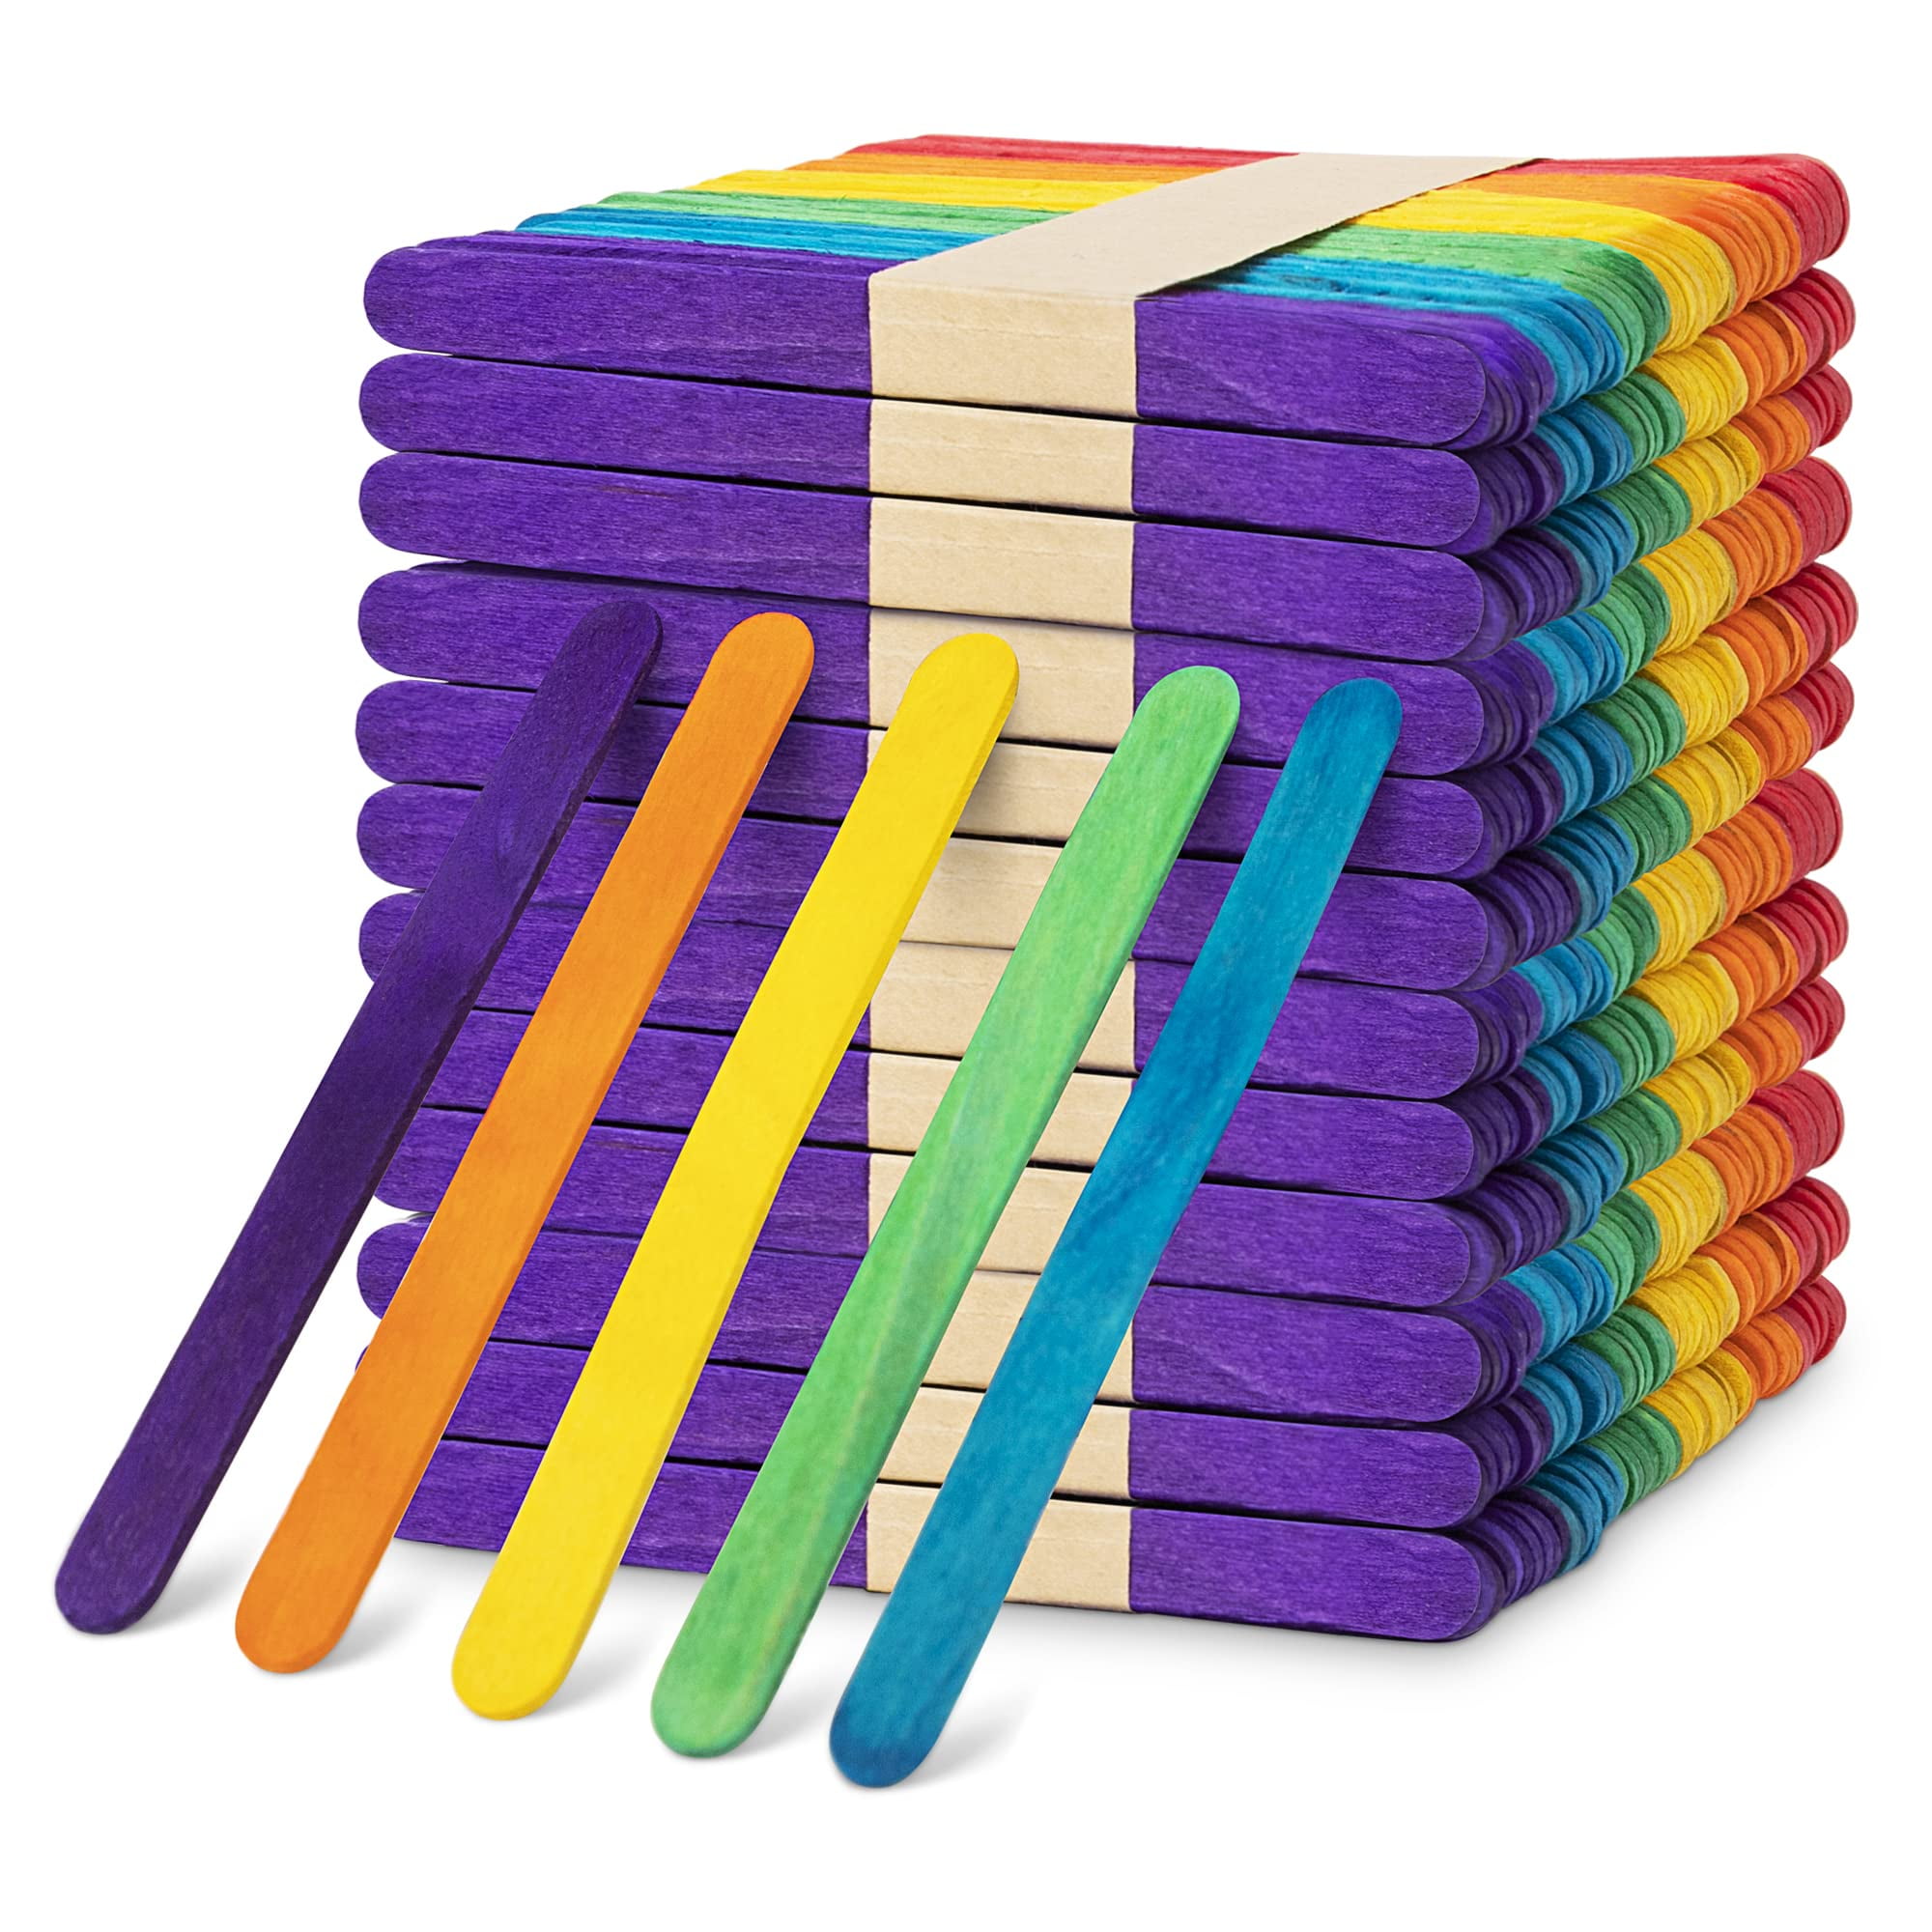 Darice 500 Pcs Colored Popsicle Sticks for Crafts, 4.5 Colorful Wooden  Rainbow Craft Sticks Supplies, STEM DIY Art, Ages 3+